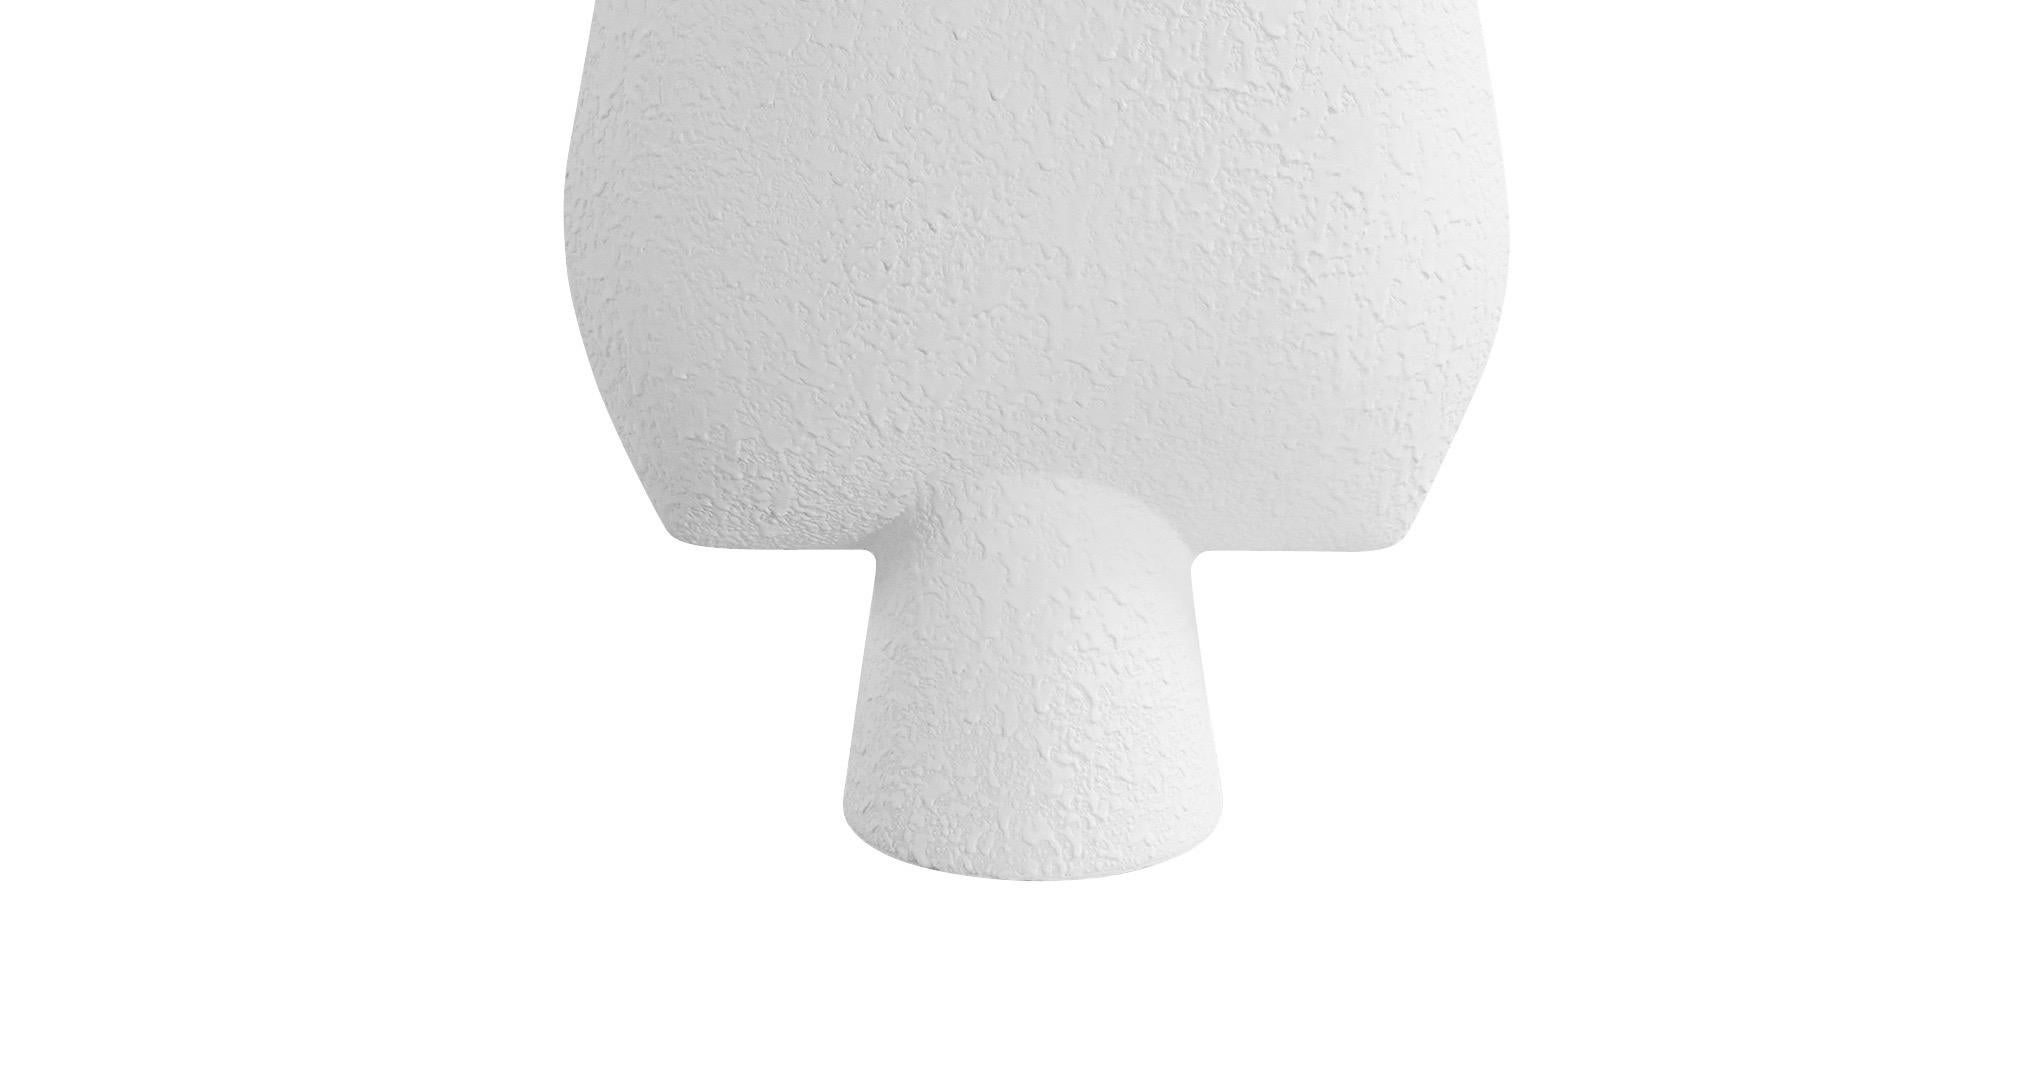 Contemporary Danish tall textured white ceramic vase. 
Arrow shaped top with tubular shaped base.
Also available in matte grey S5606
Two available and sold individually.
ARRIVAL TBD
